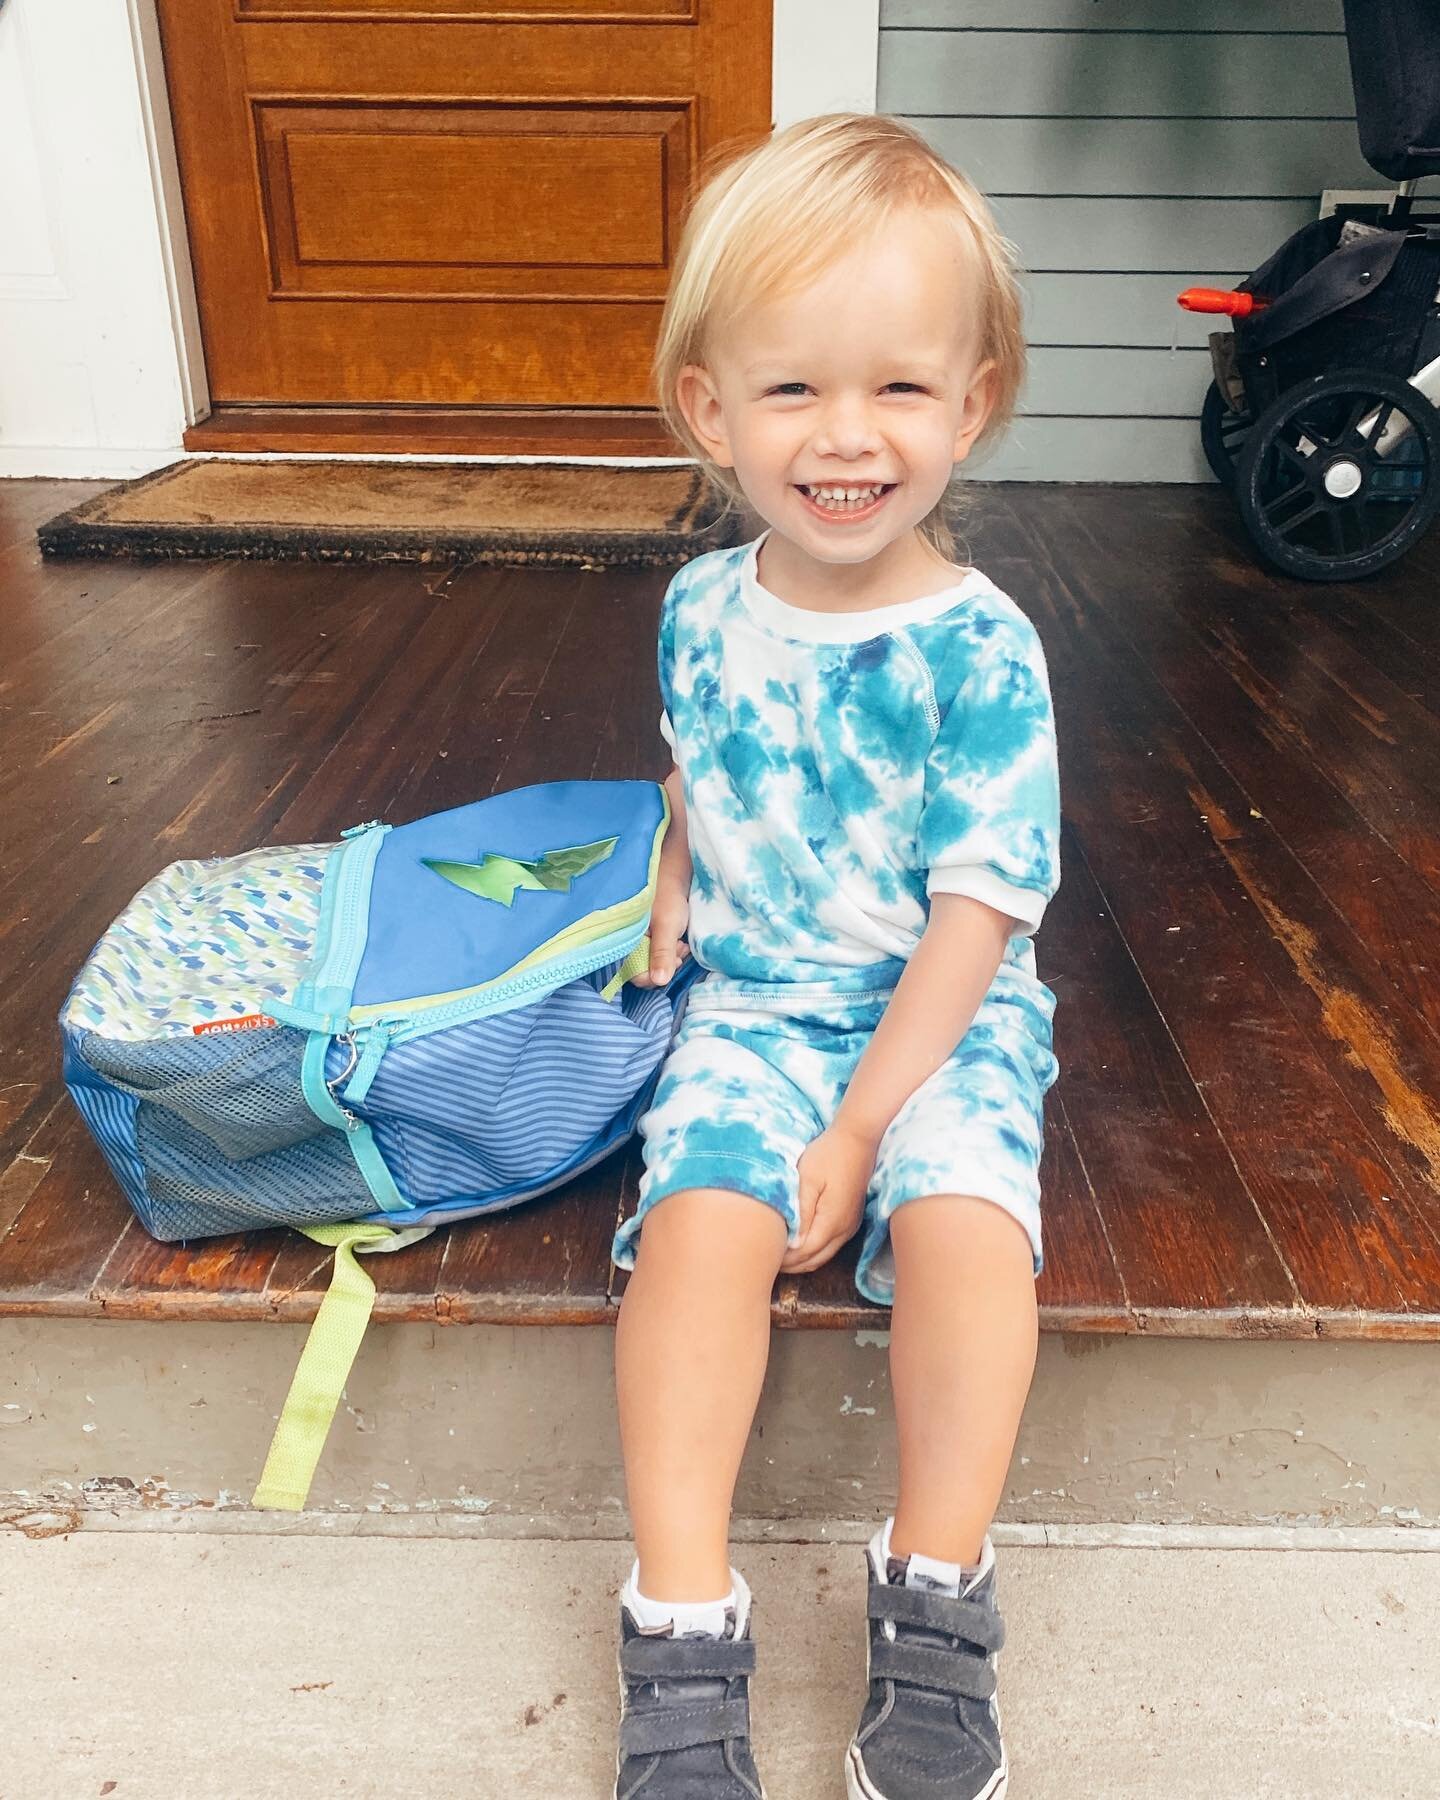 First Day of Camp for my little nugget!! 🎉 I mean how happy does he look!! He walked in with his cousin like he owned the place! Now I will be sobbing for the next few hours 🥲 but I know it&rsquo;s for the best! @ekush85 .
.
#thirdbaby #myboy #boym